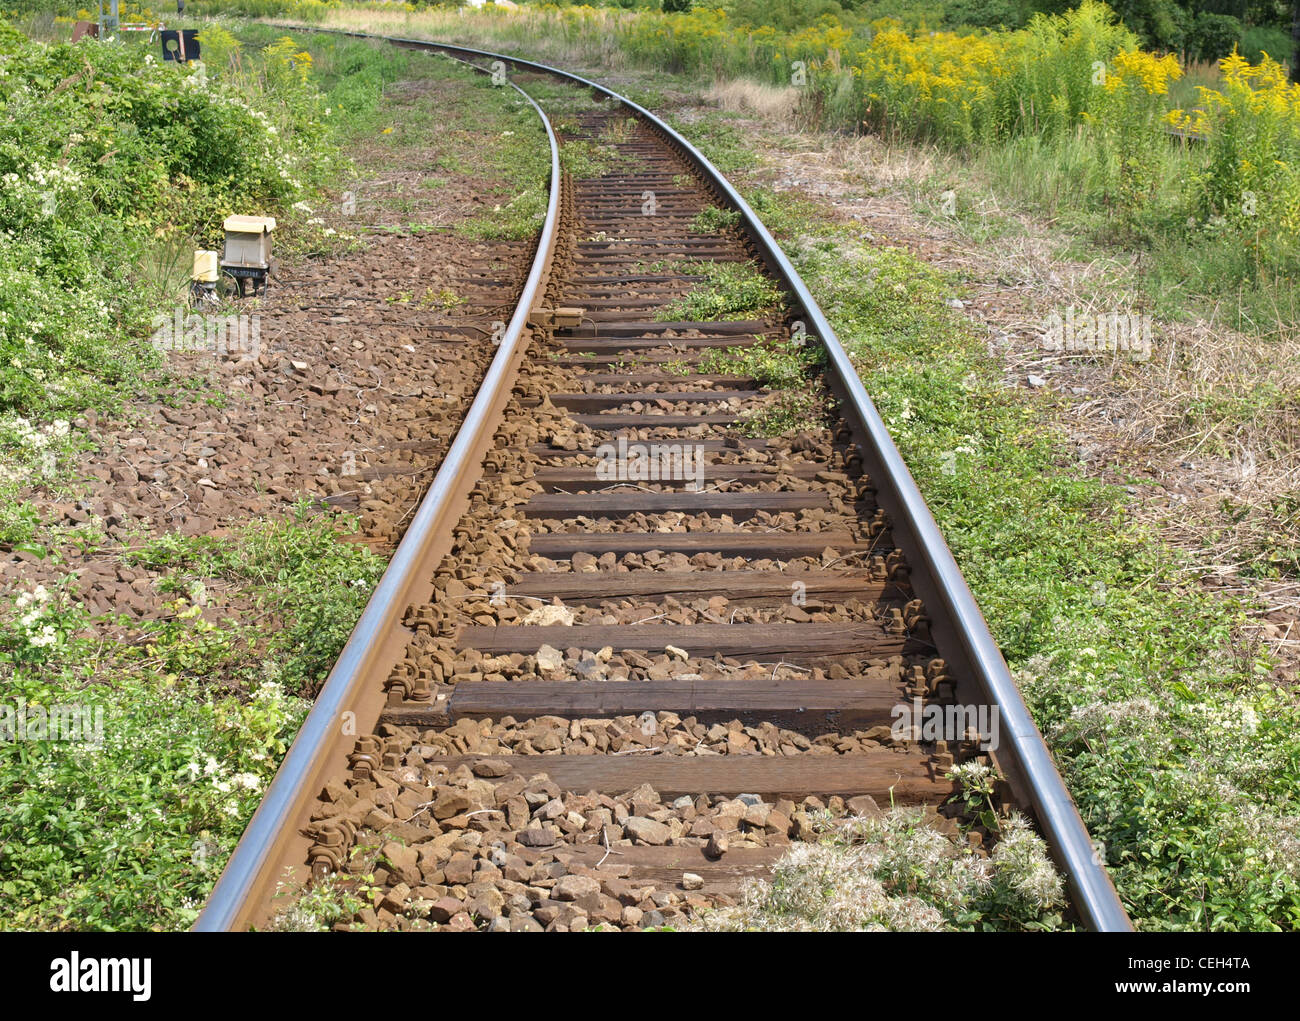 Detail of Railway railroad tracks for trains Stock Photo